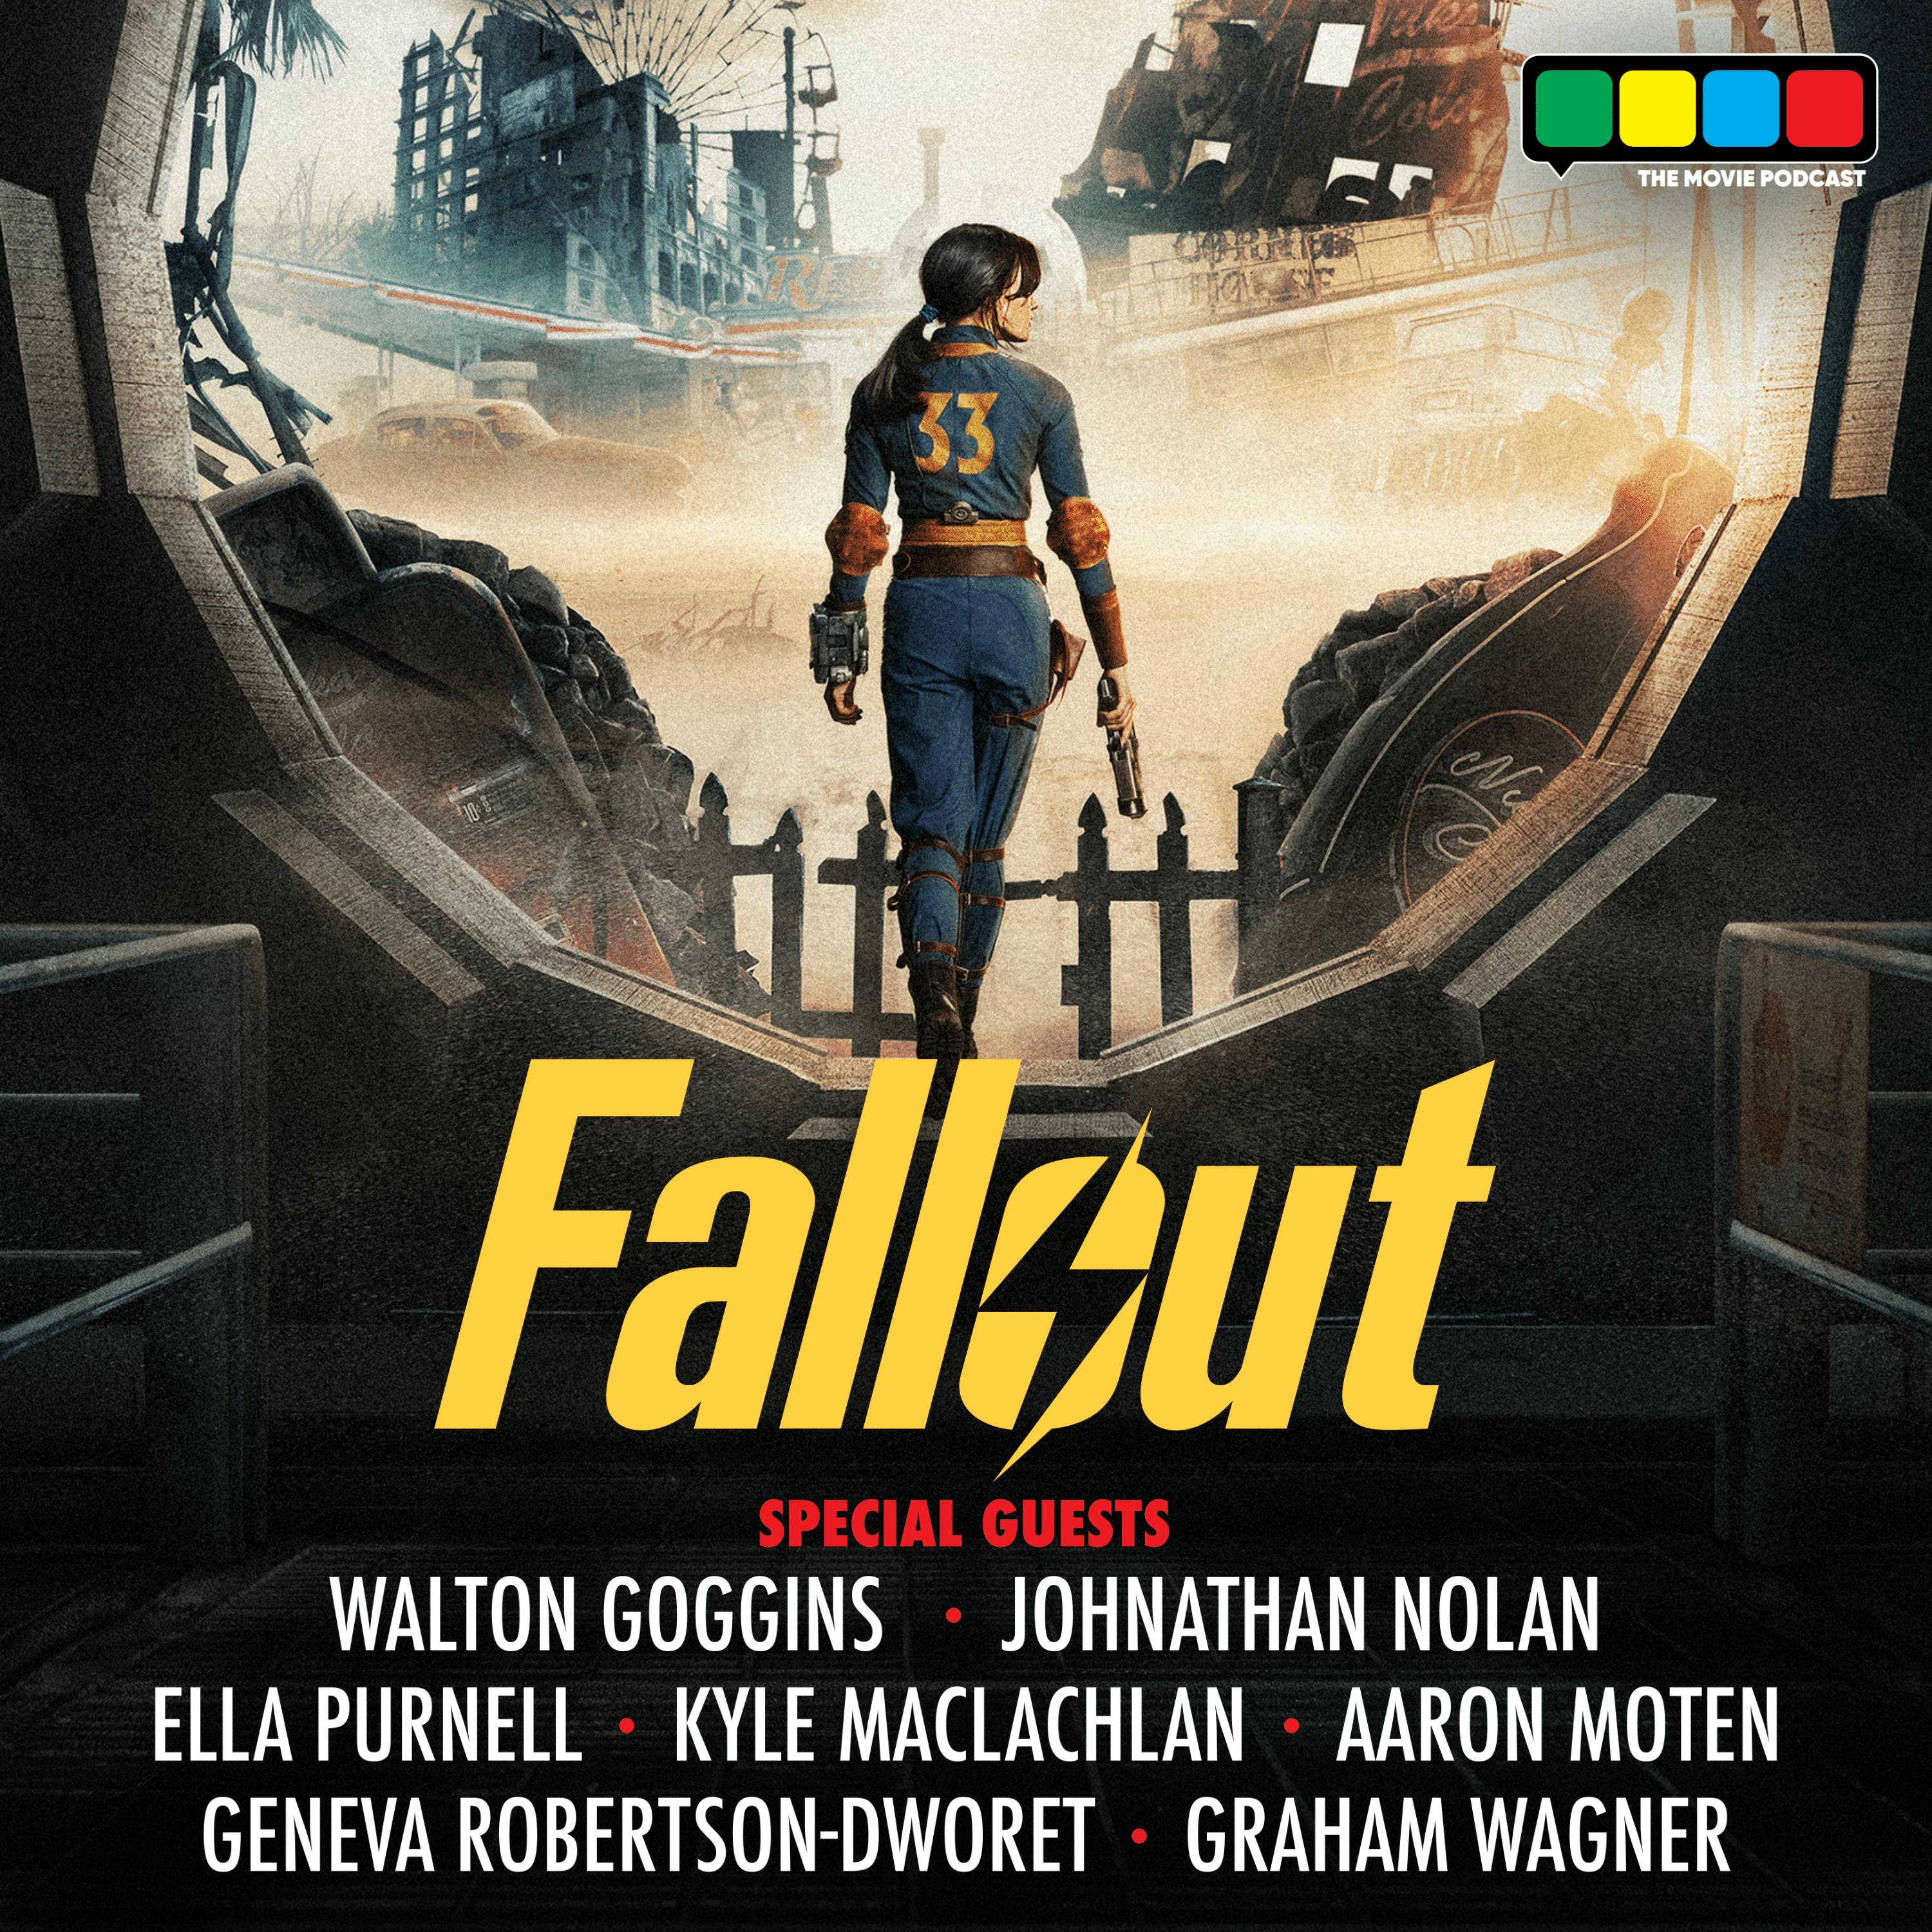 Fallout Interview with Walton Goggins, Johnathan Nolan, Ella Purnell, Kyle MacLachlan, Aaron Moten, and Graham Wagner (Prime Video)